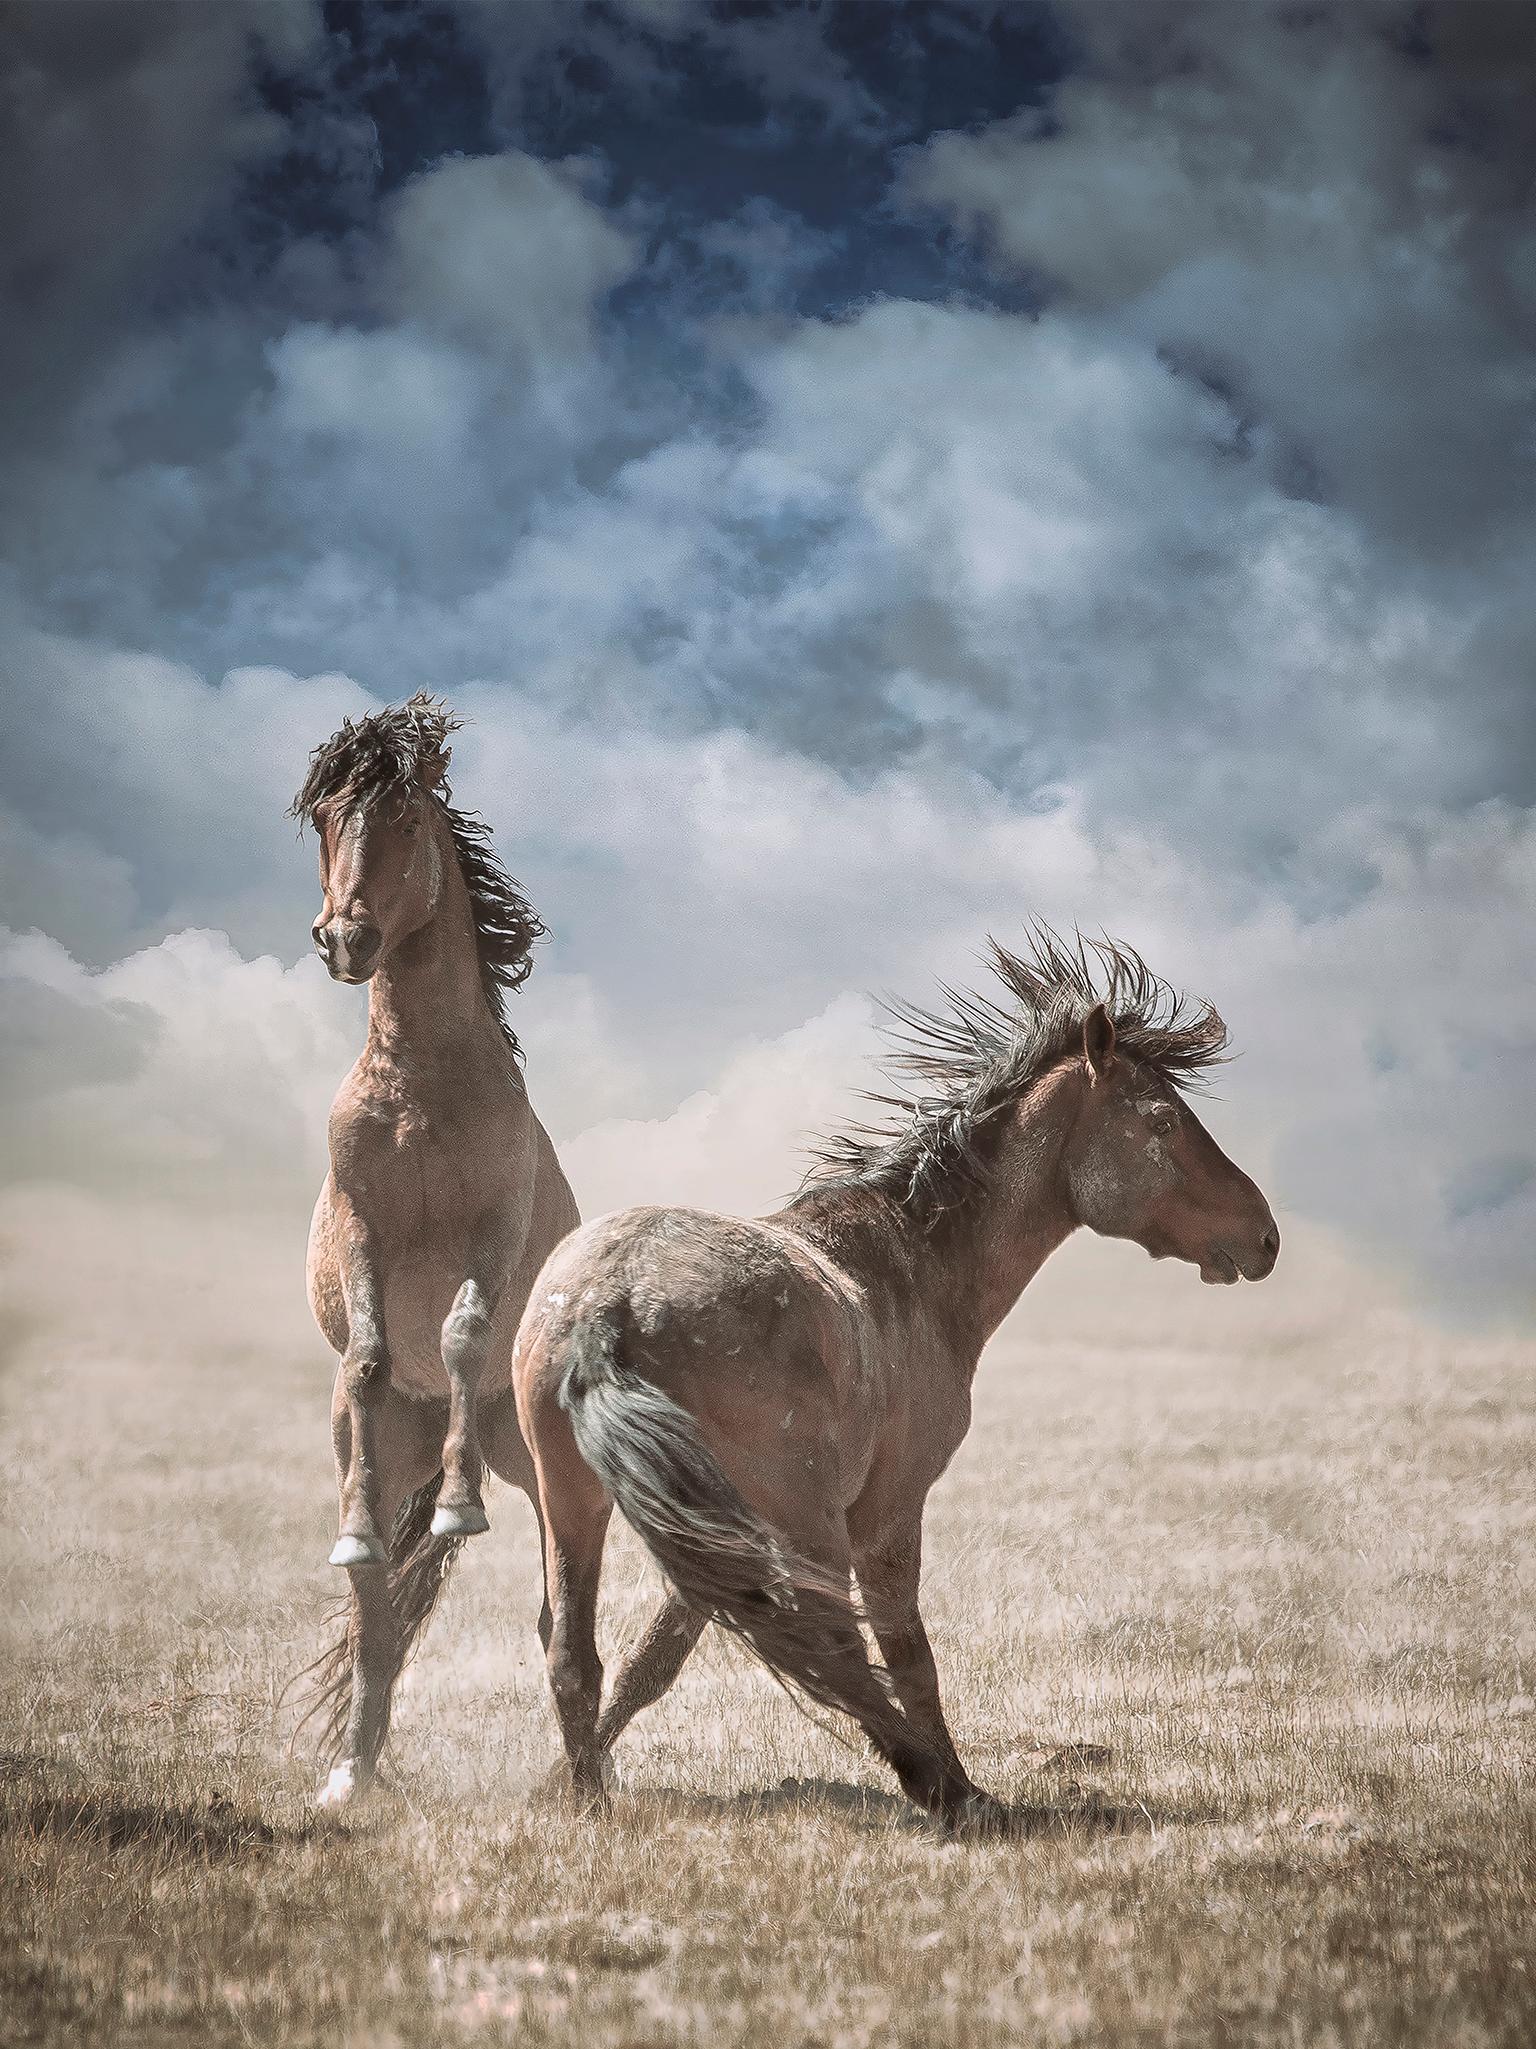 "Wonder Horses" 20 x 24  - Wild Horses - Wild Mustang Photography - Art by Shane Russeck